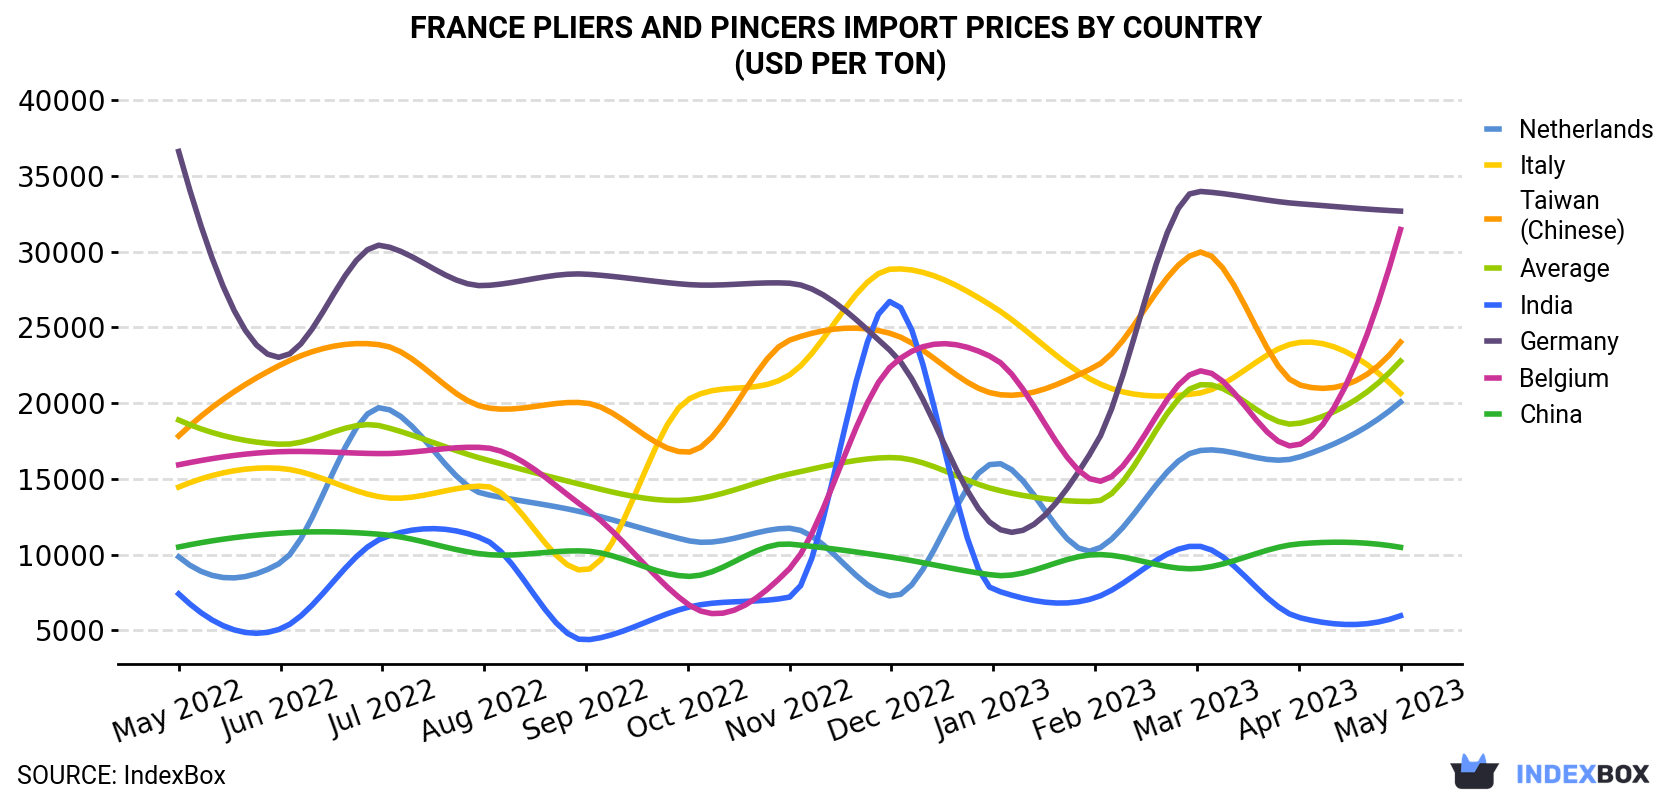 France Pliers And Pincers Import Prices By Country (USD Per Ton)